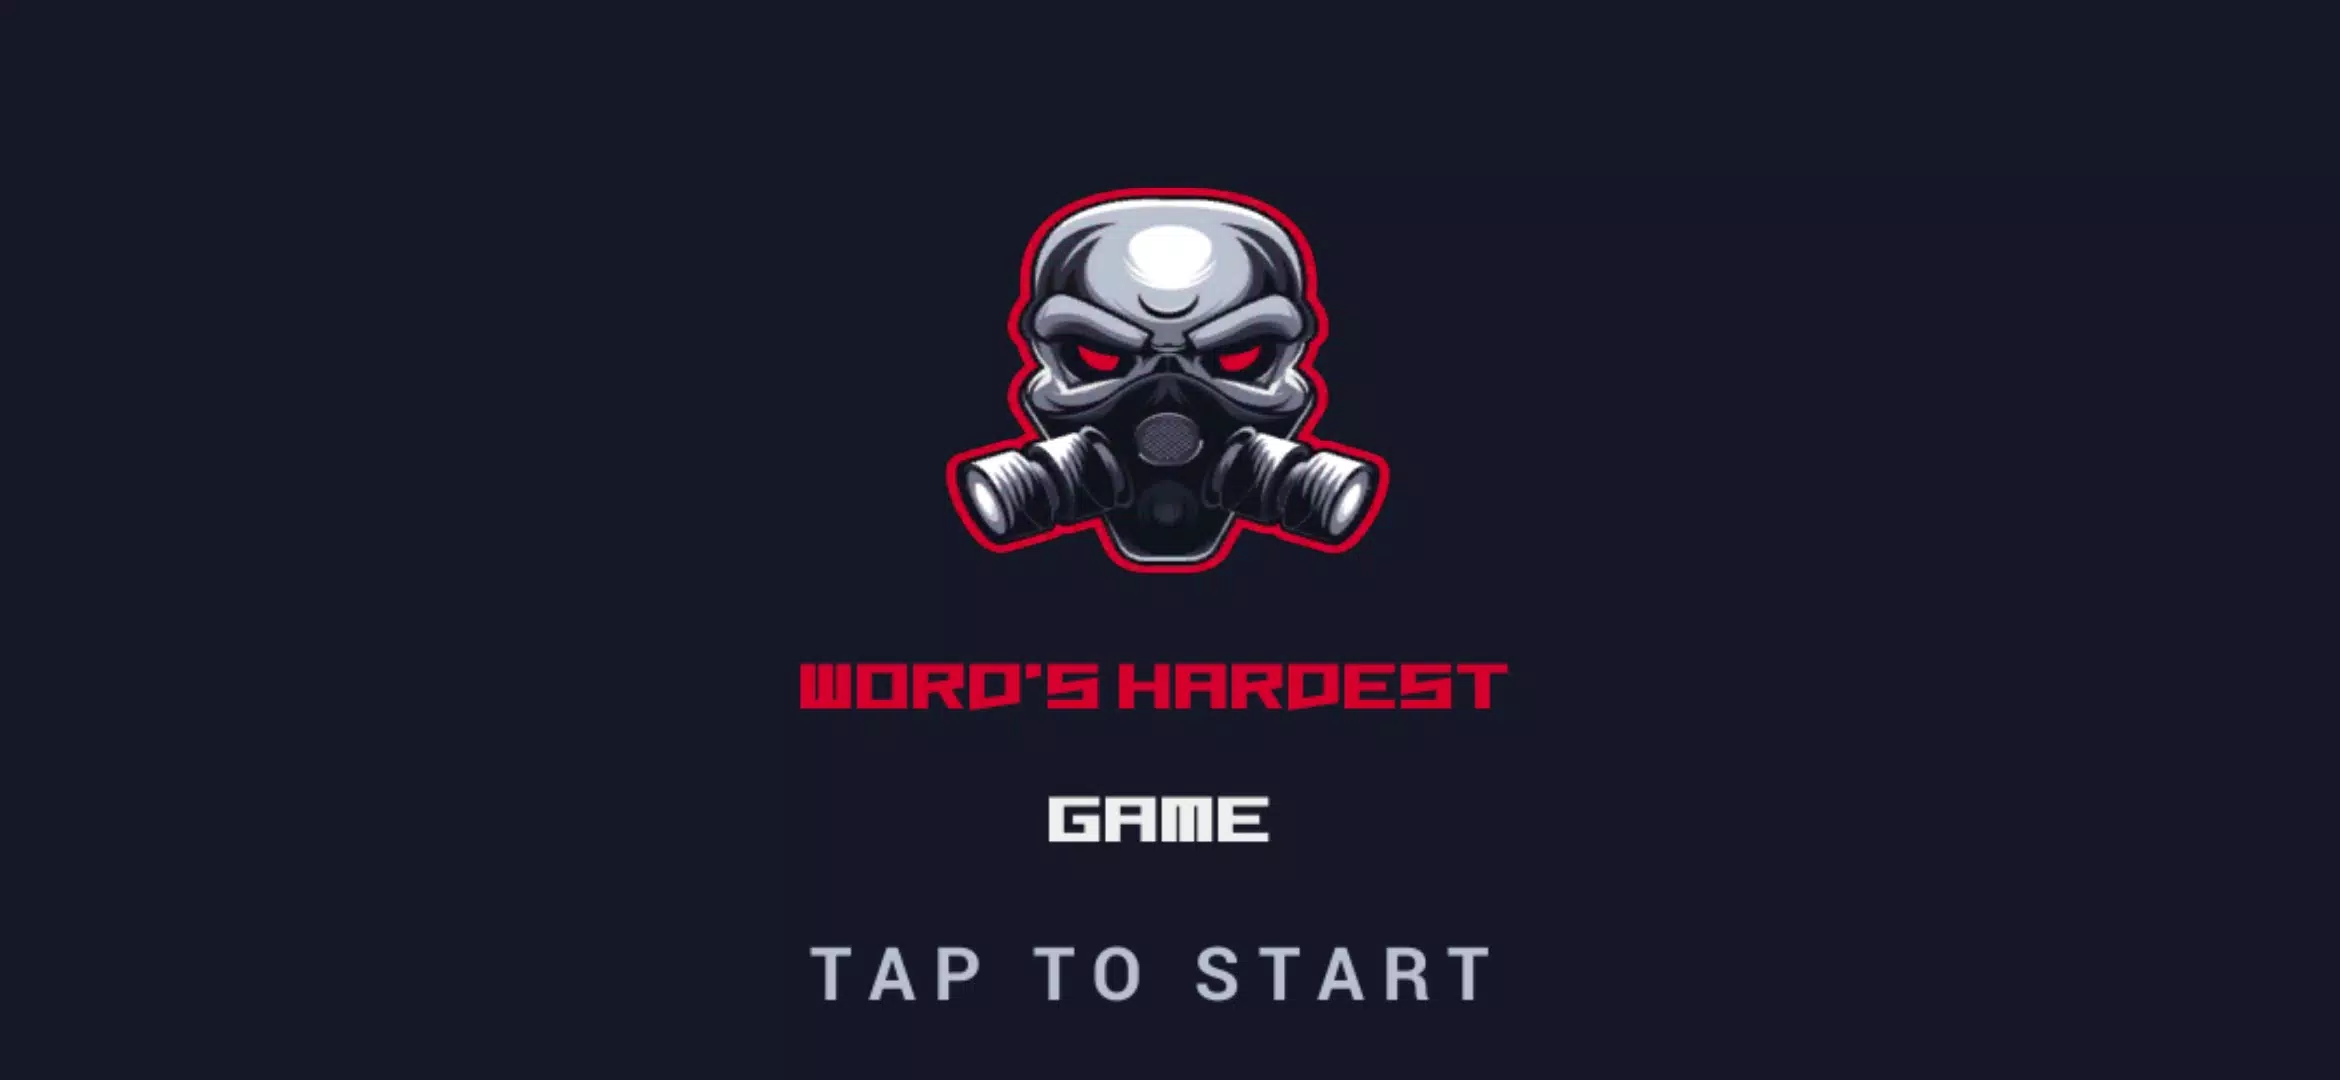 The Words Hardest Game